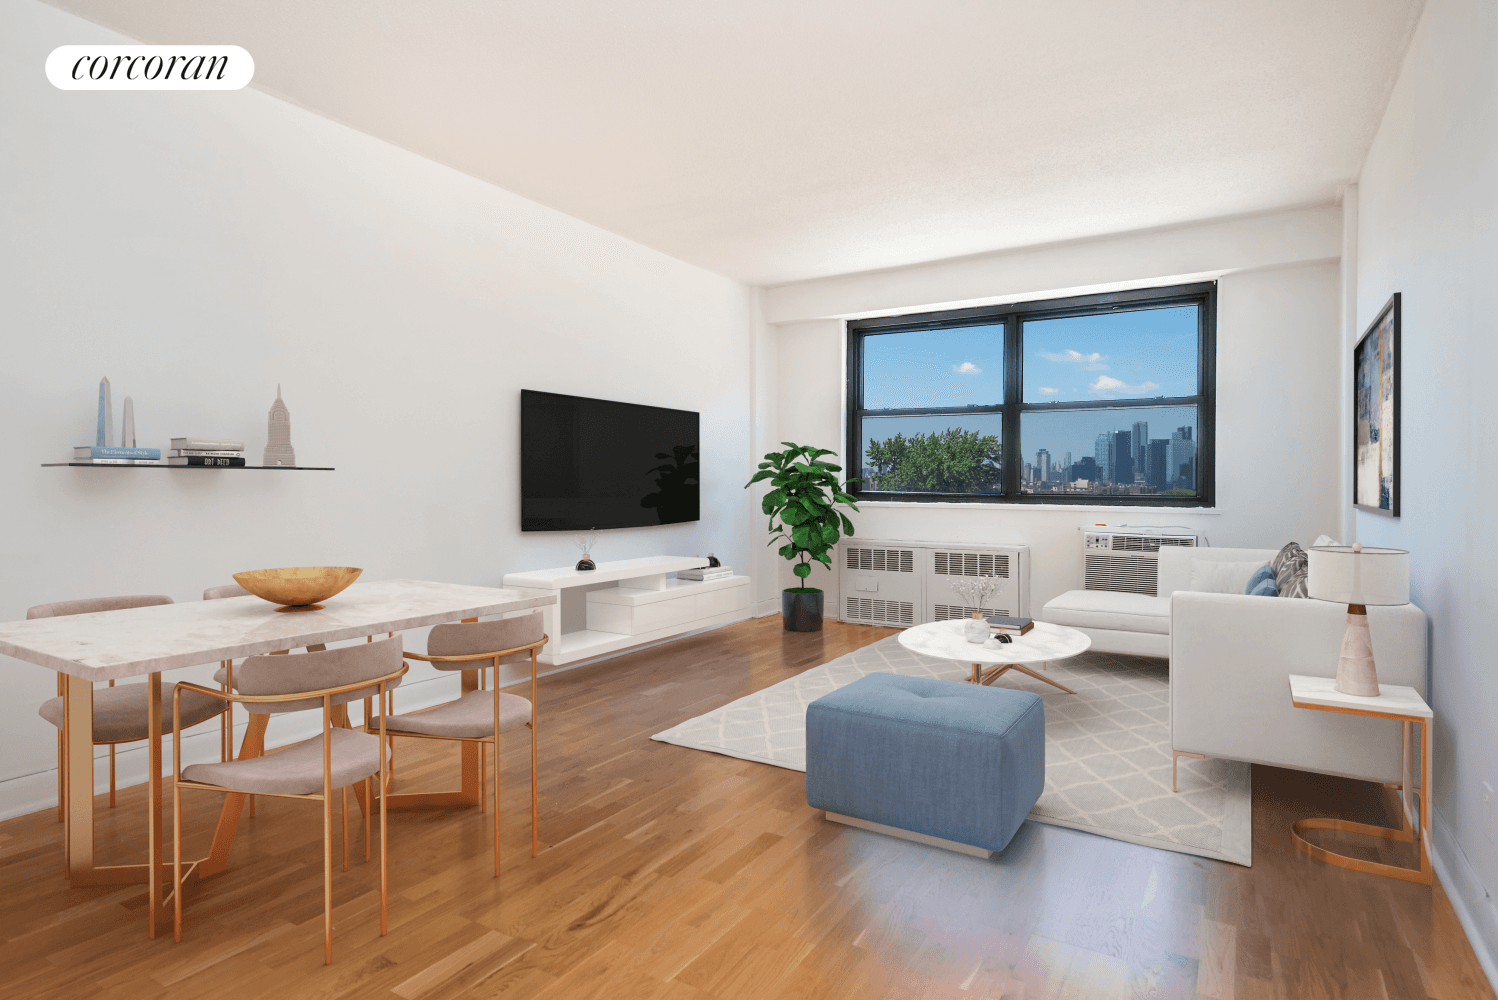 This beautiful high floor 1 bedroom with views of the city from each room also boasts 4 large closets, recent renovations, fresh paint and a bathroom that was just reglazed ...